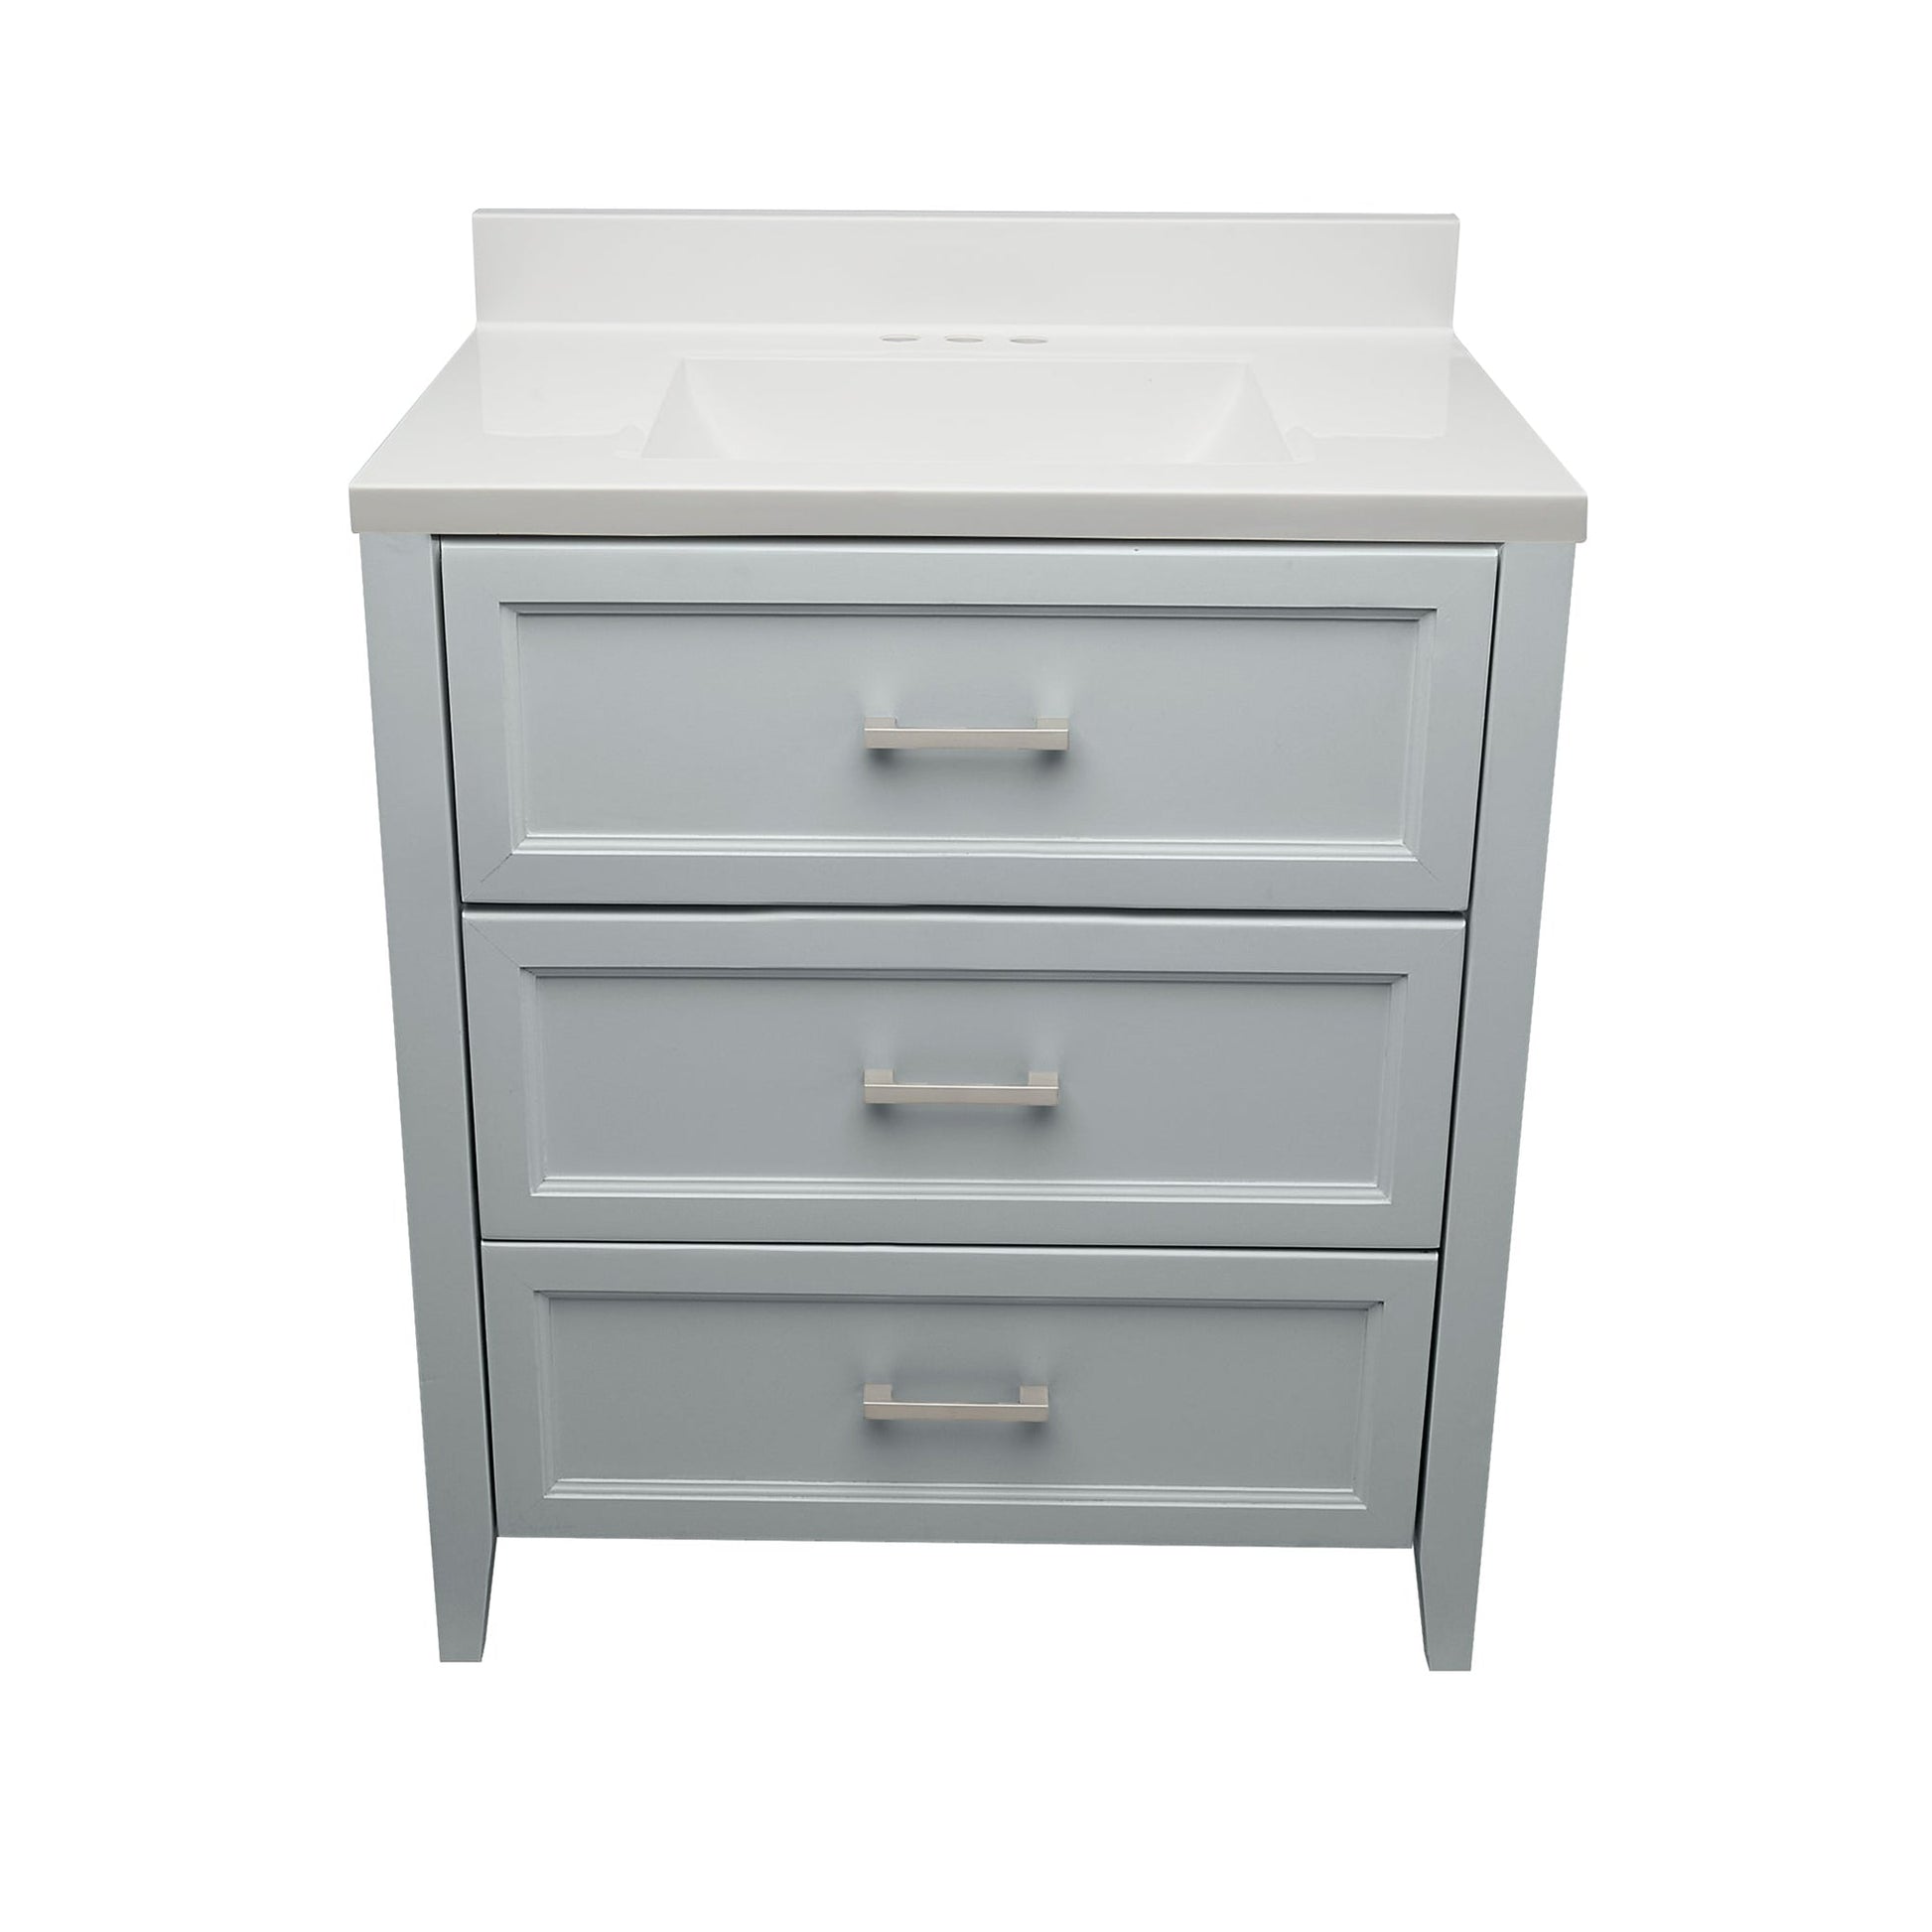 Ella's Bubbles Zermatt 31" Gray Bathroom Vanity With White Cultured Marble Top With White Backsplash and Sink